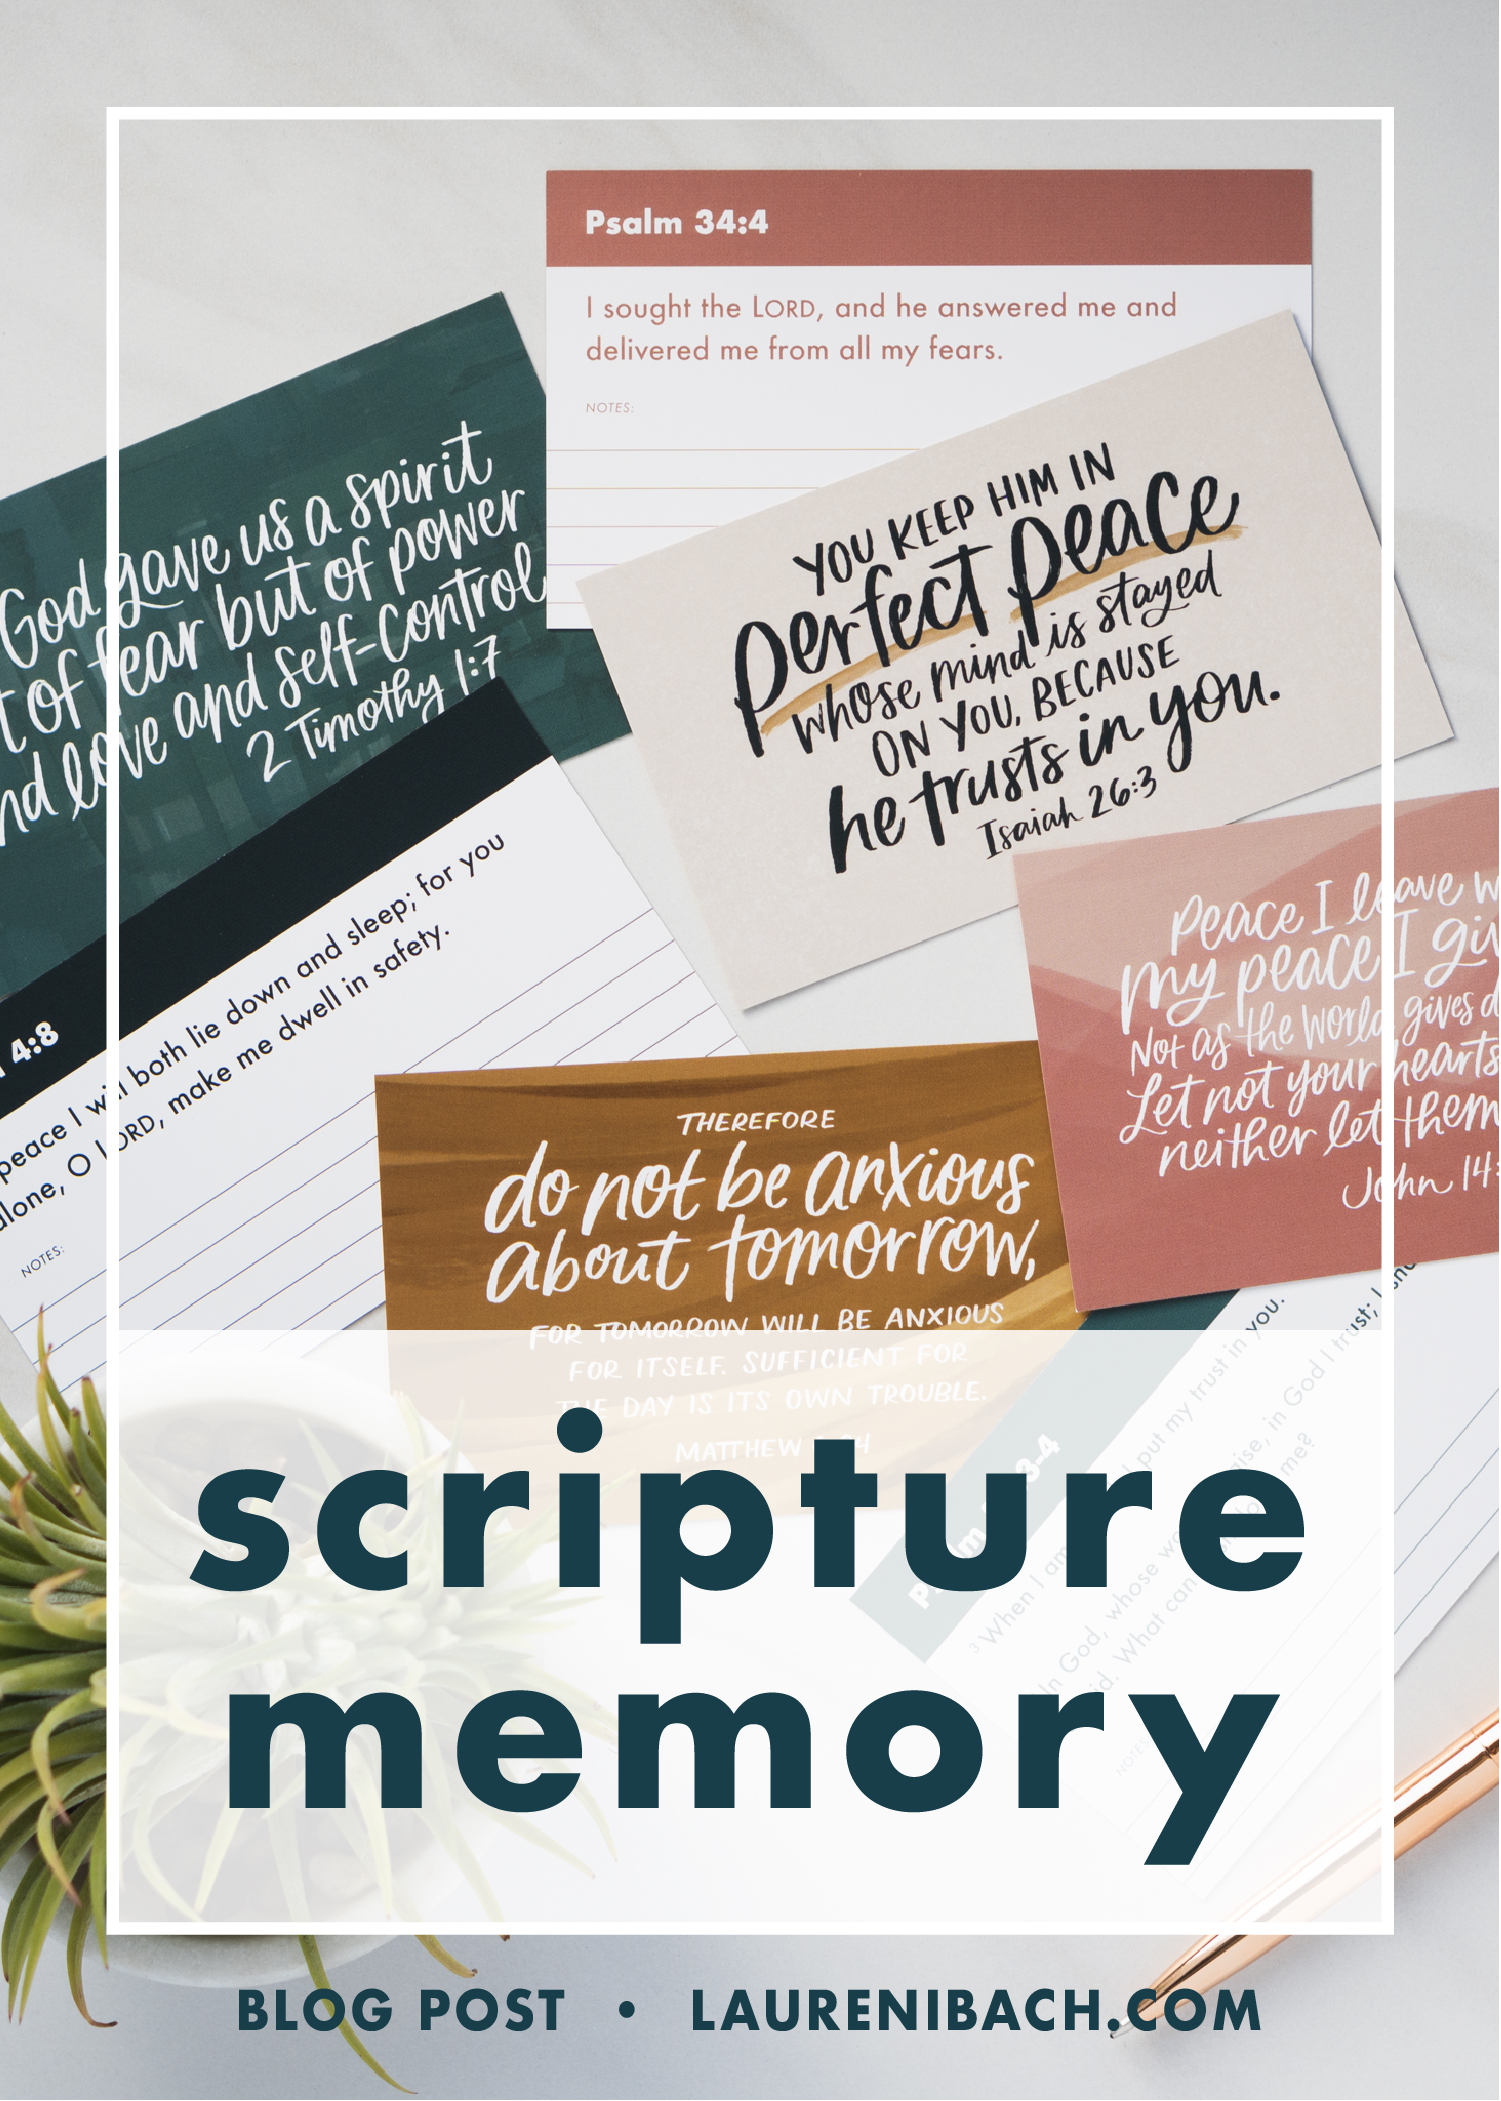 Scripture Memory Blog Post for Christian Women by Lauren Ibach